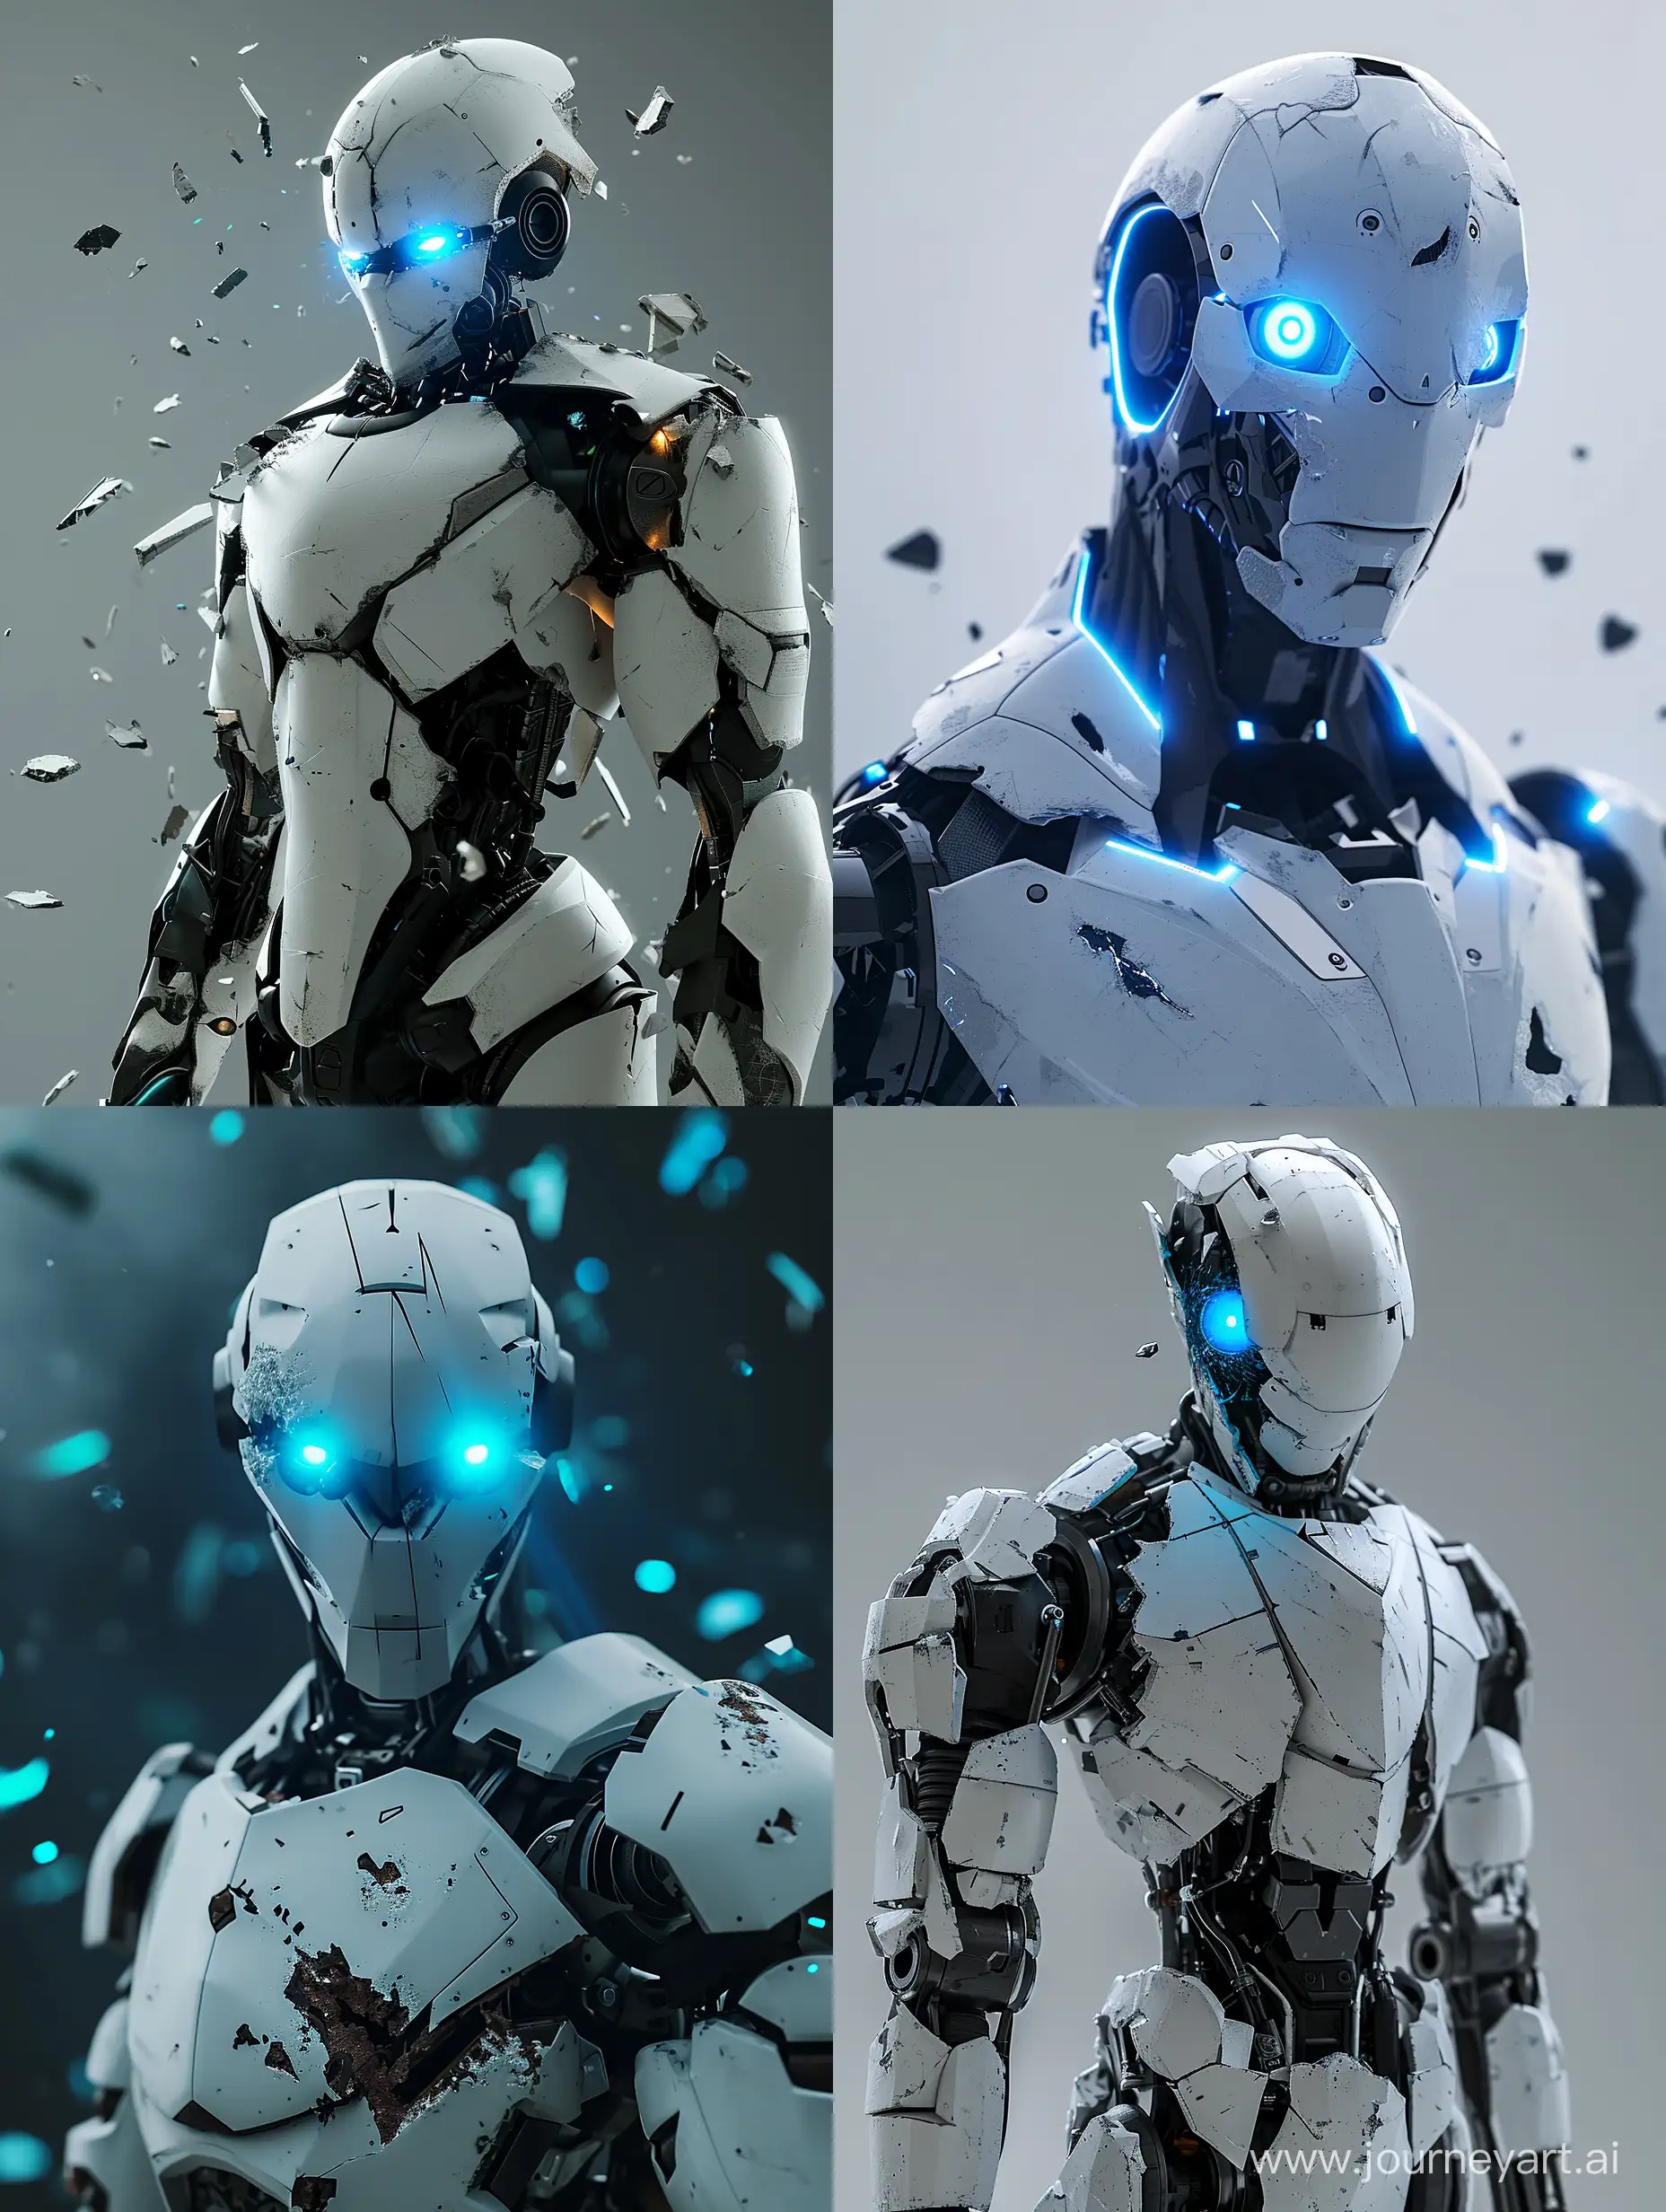 Broken-Robot-with-Glowing-Blue-Eyes-HighResolution-8K-VRay-Image